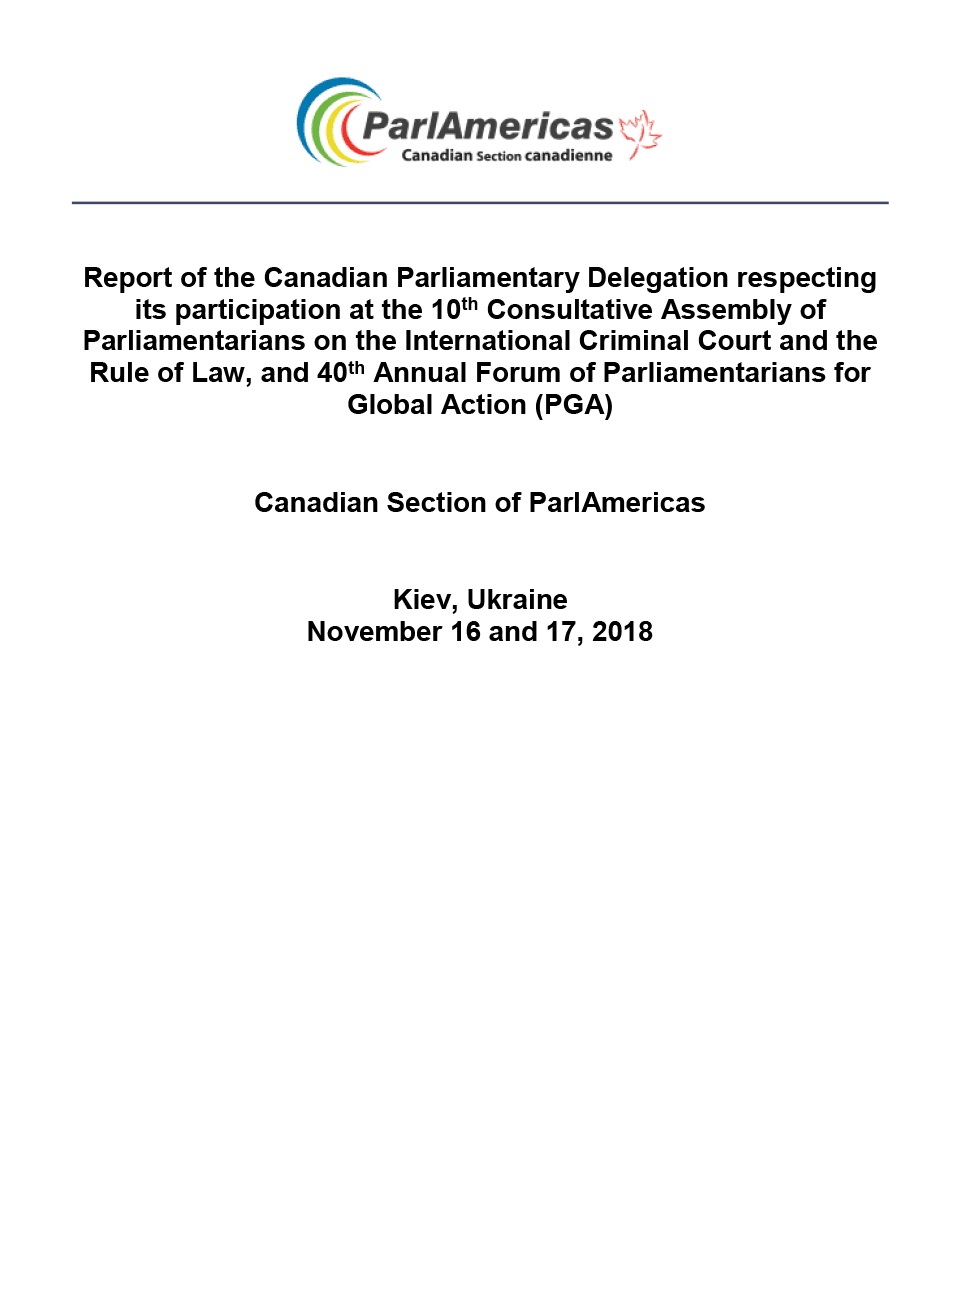 Report of the Canadian Parliamentary Delegation on its participation at the 10th Consultative Assembly of Parliamentarians on the International Criminal Court and the Rule of Law